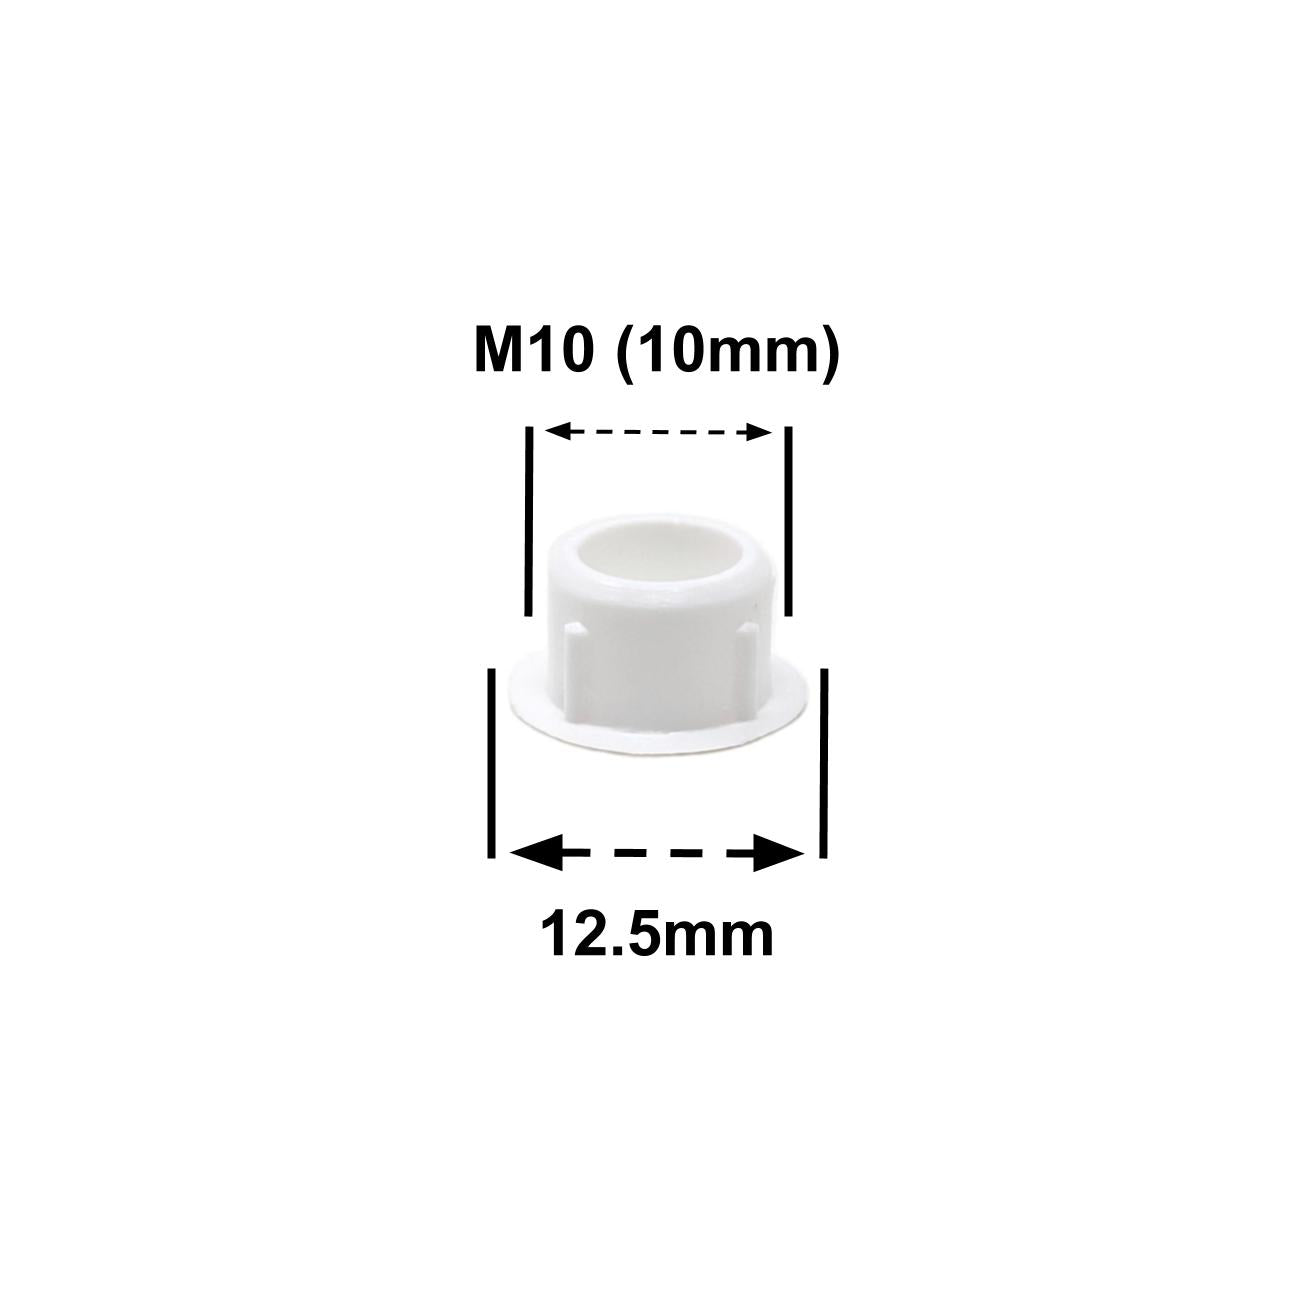 M10 White Plastic Hole Plugs, Made in Germany - Keay Vital Parts